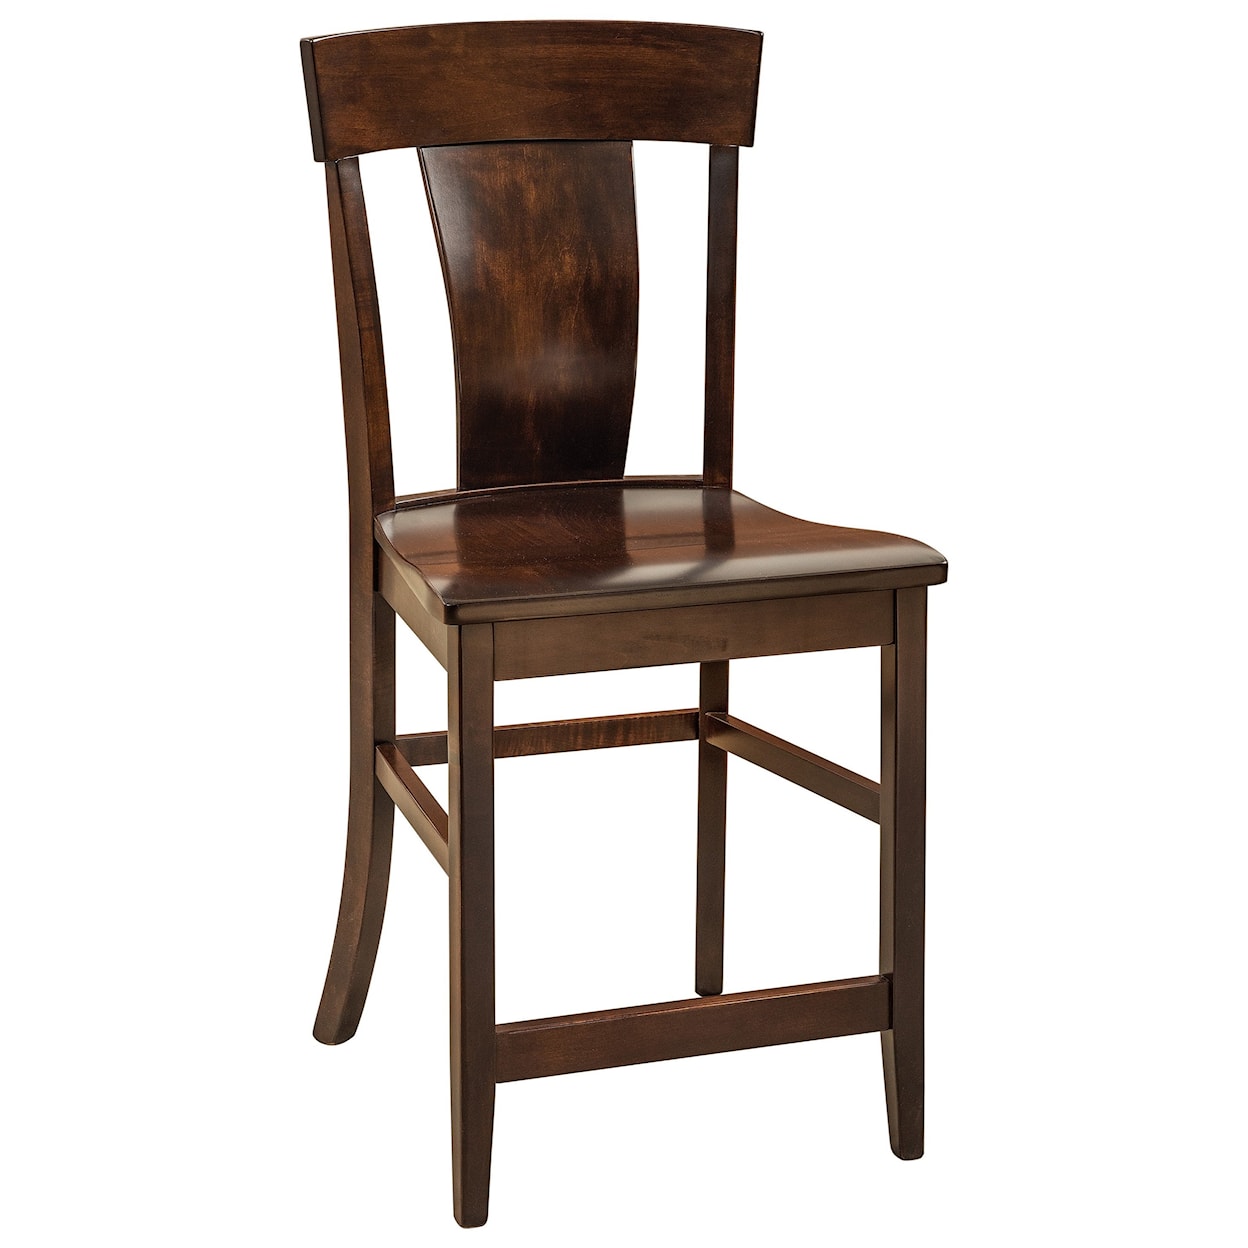 F&N Woodworking Baldwin Stationary Counter Height Stool - Leather Se